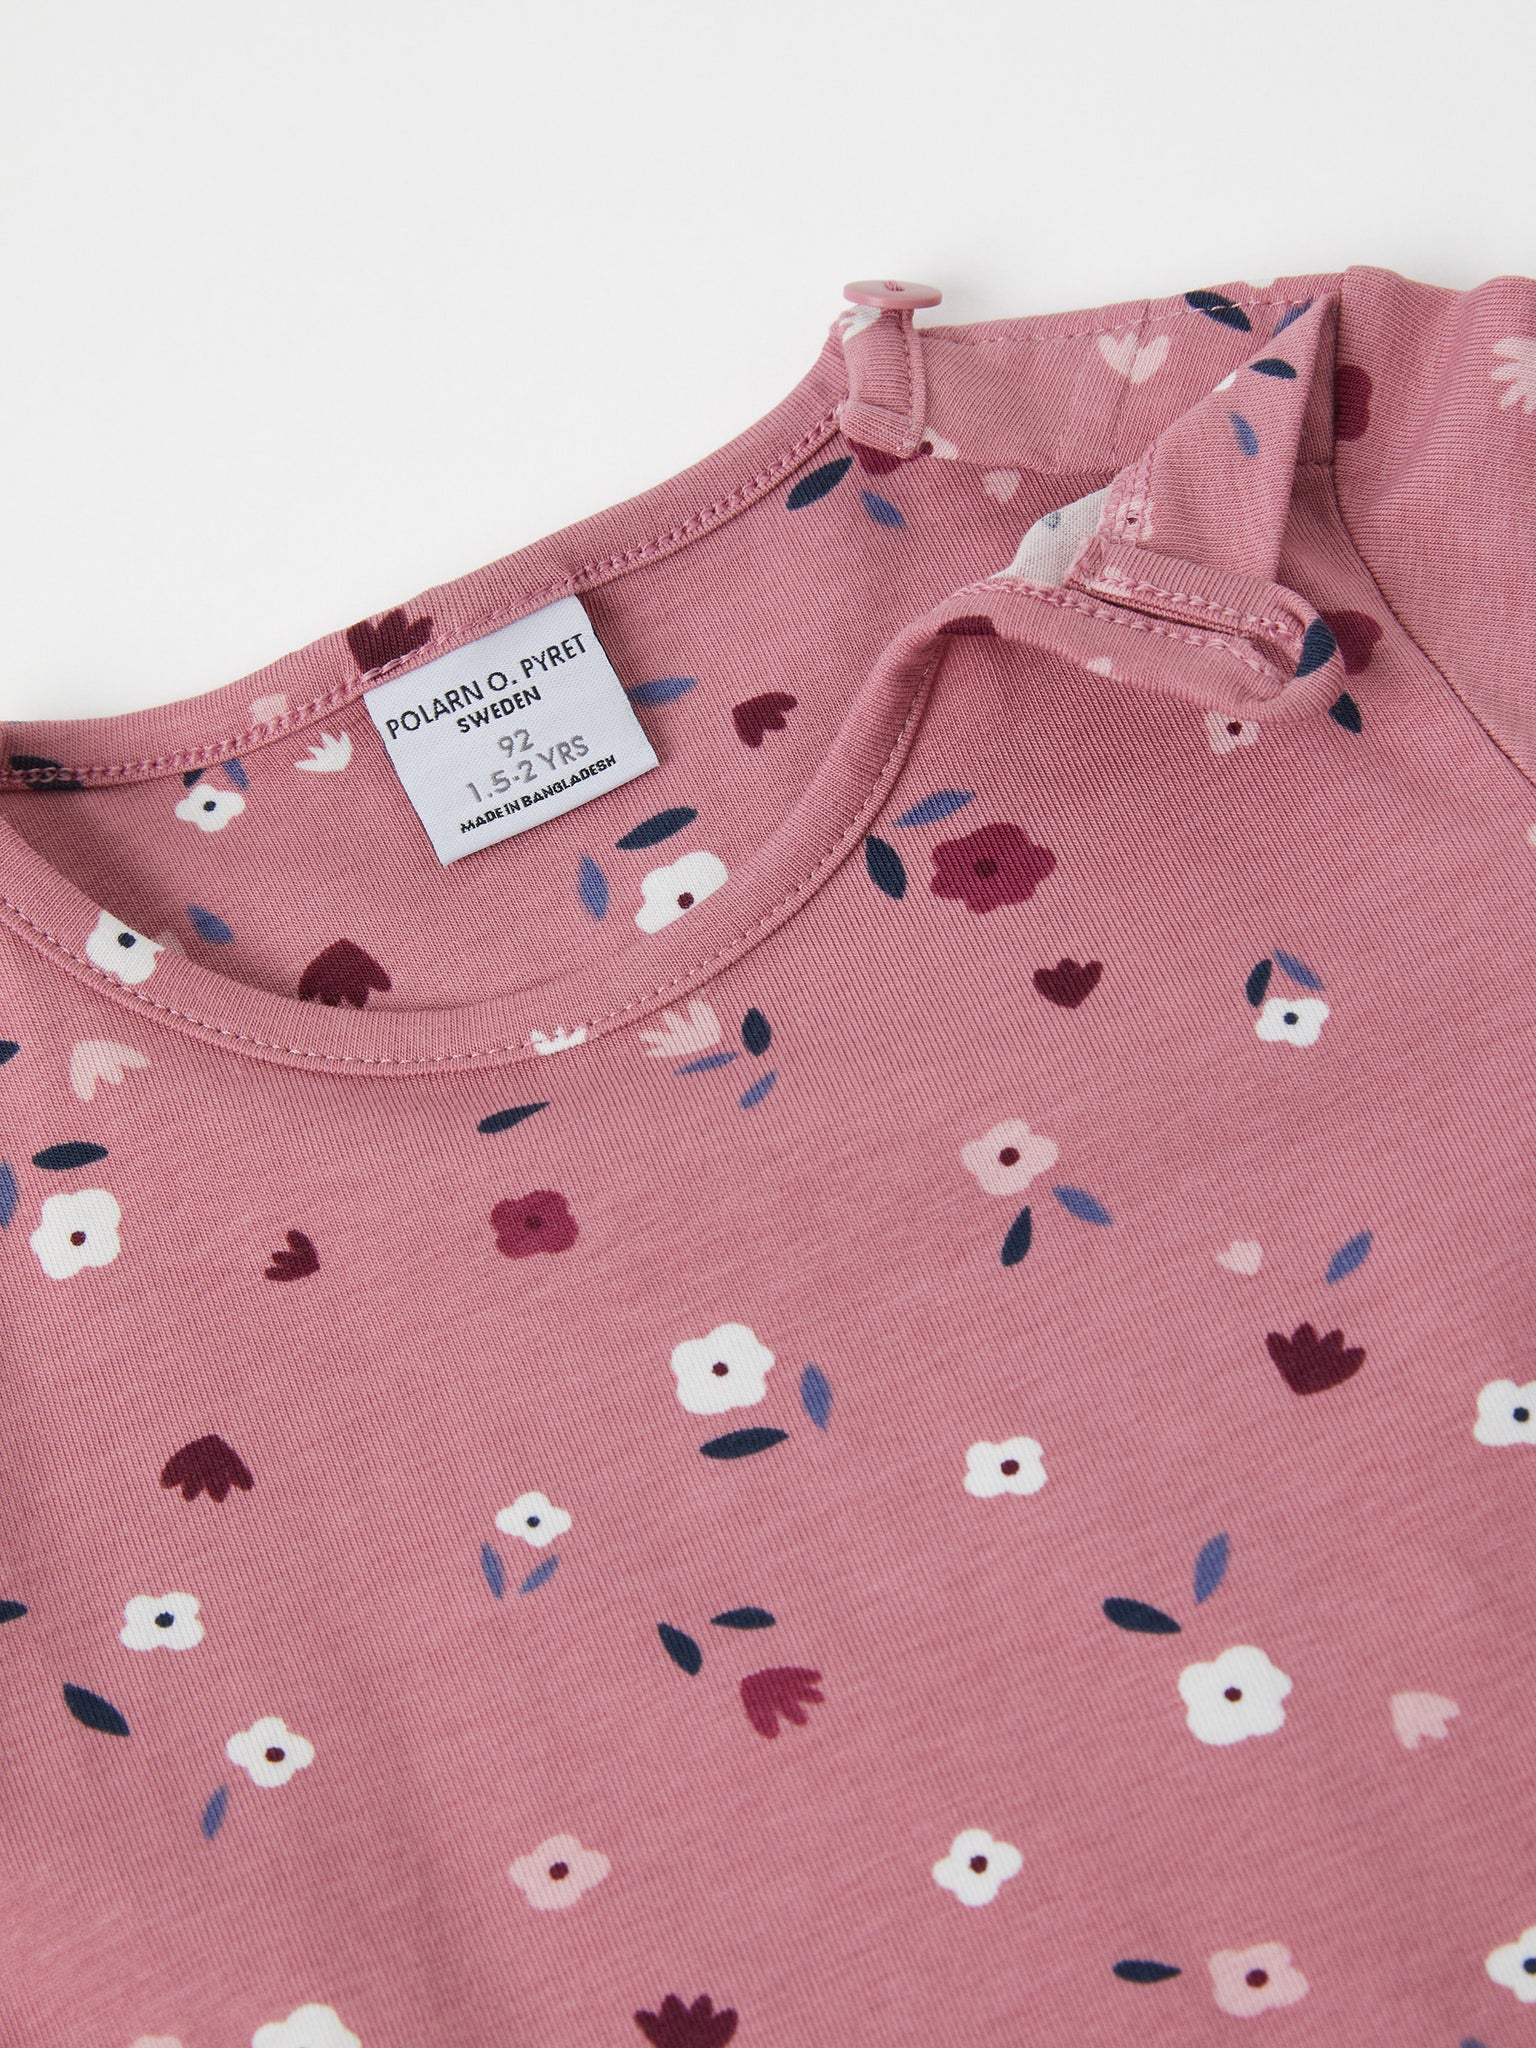 Organic Cotton Floral Kids Top from the Polarn O. Pyret kidswear collection. Ethically produced kids clothing.